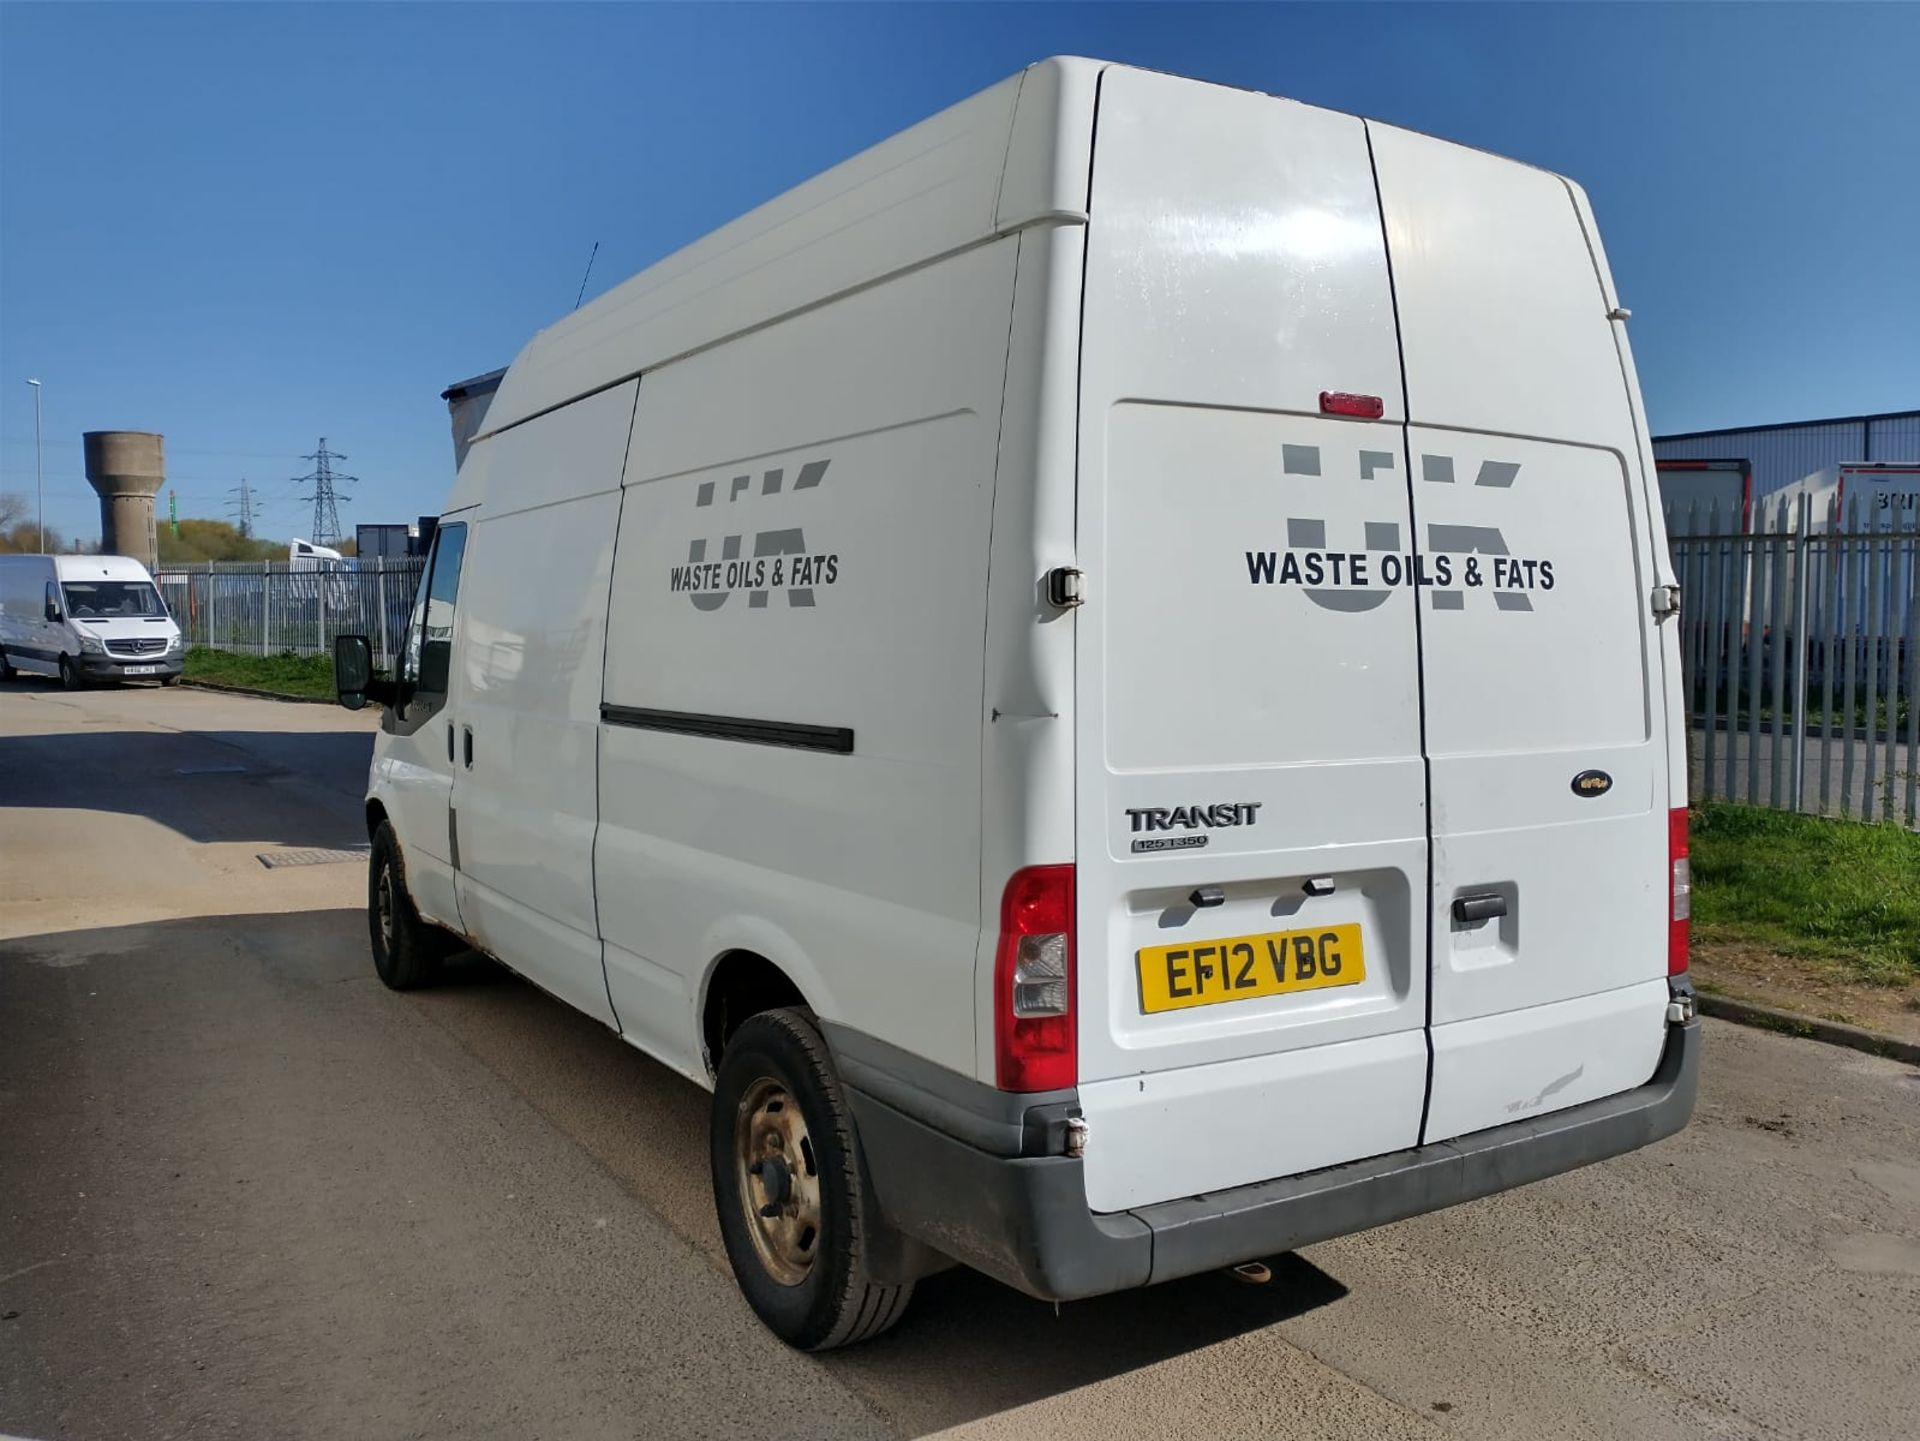 2012 Ford Transit Panel Van 2.2 5dr Medium Roof Panel Van - CL505 - Location: Corby - Image 9 of 13